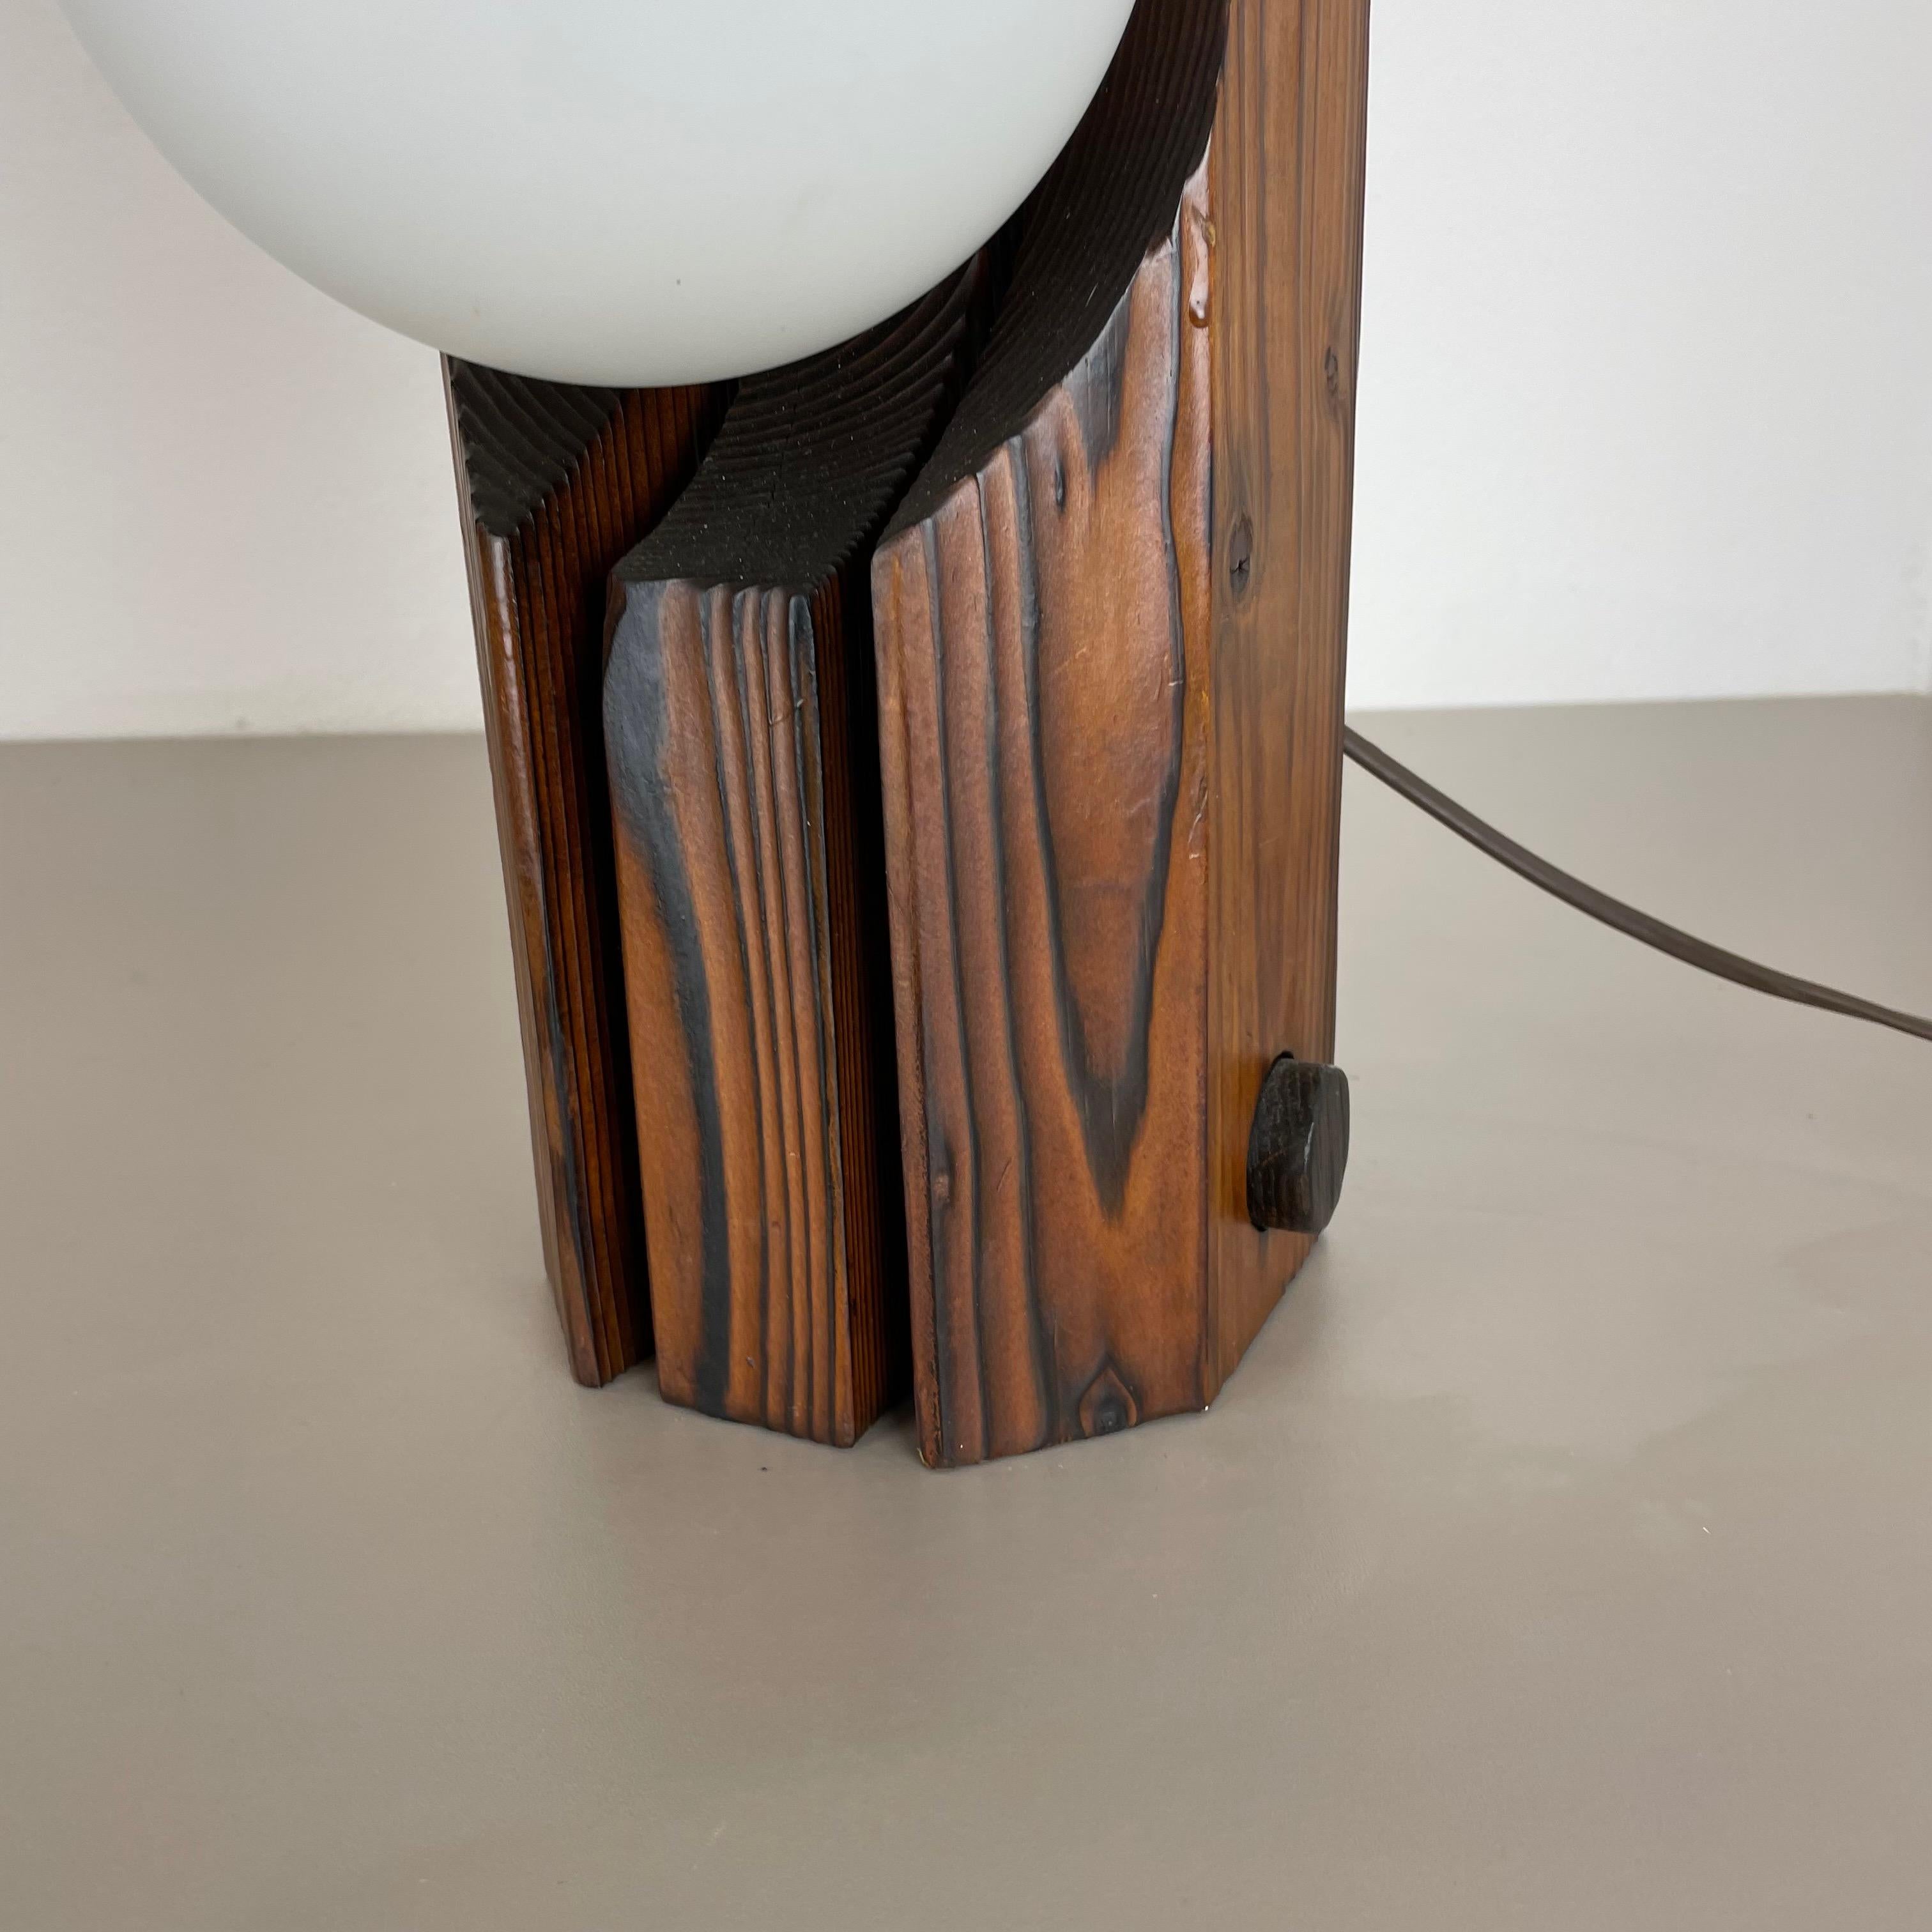 Large Organic Sculptural Pine Wooden Floor Light Made Temde Lights Germany 1970s In Good Condition For Sale In Kirchlengern, DE